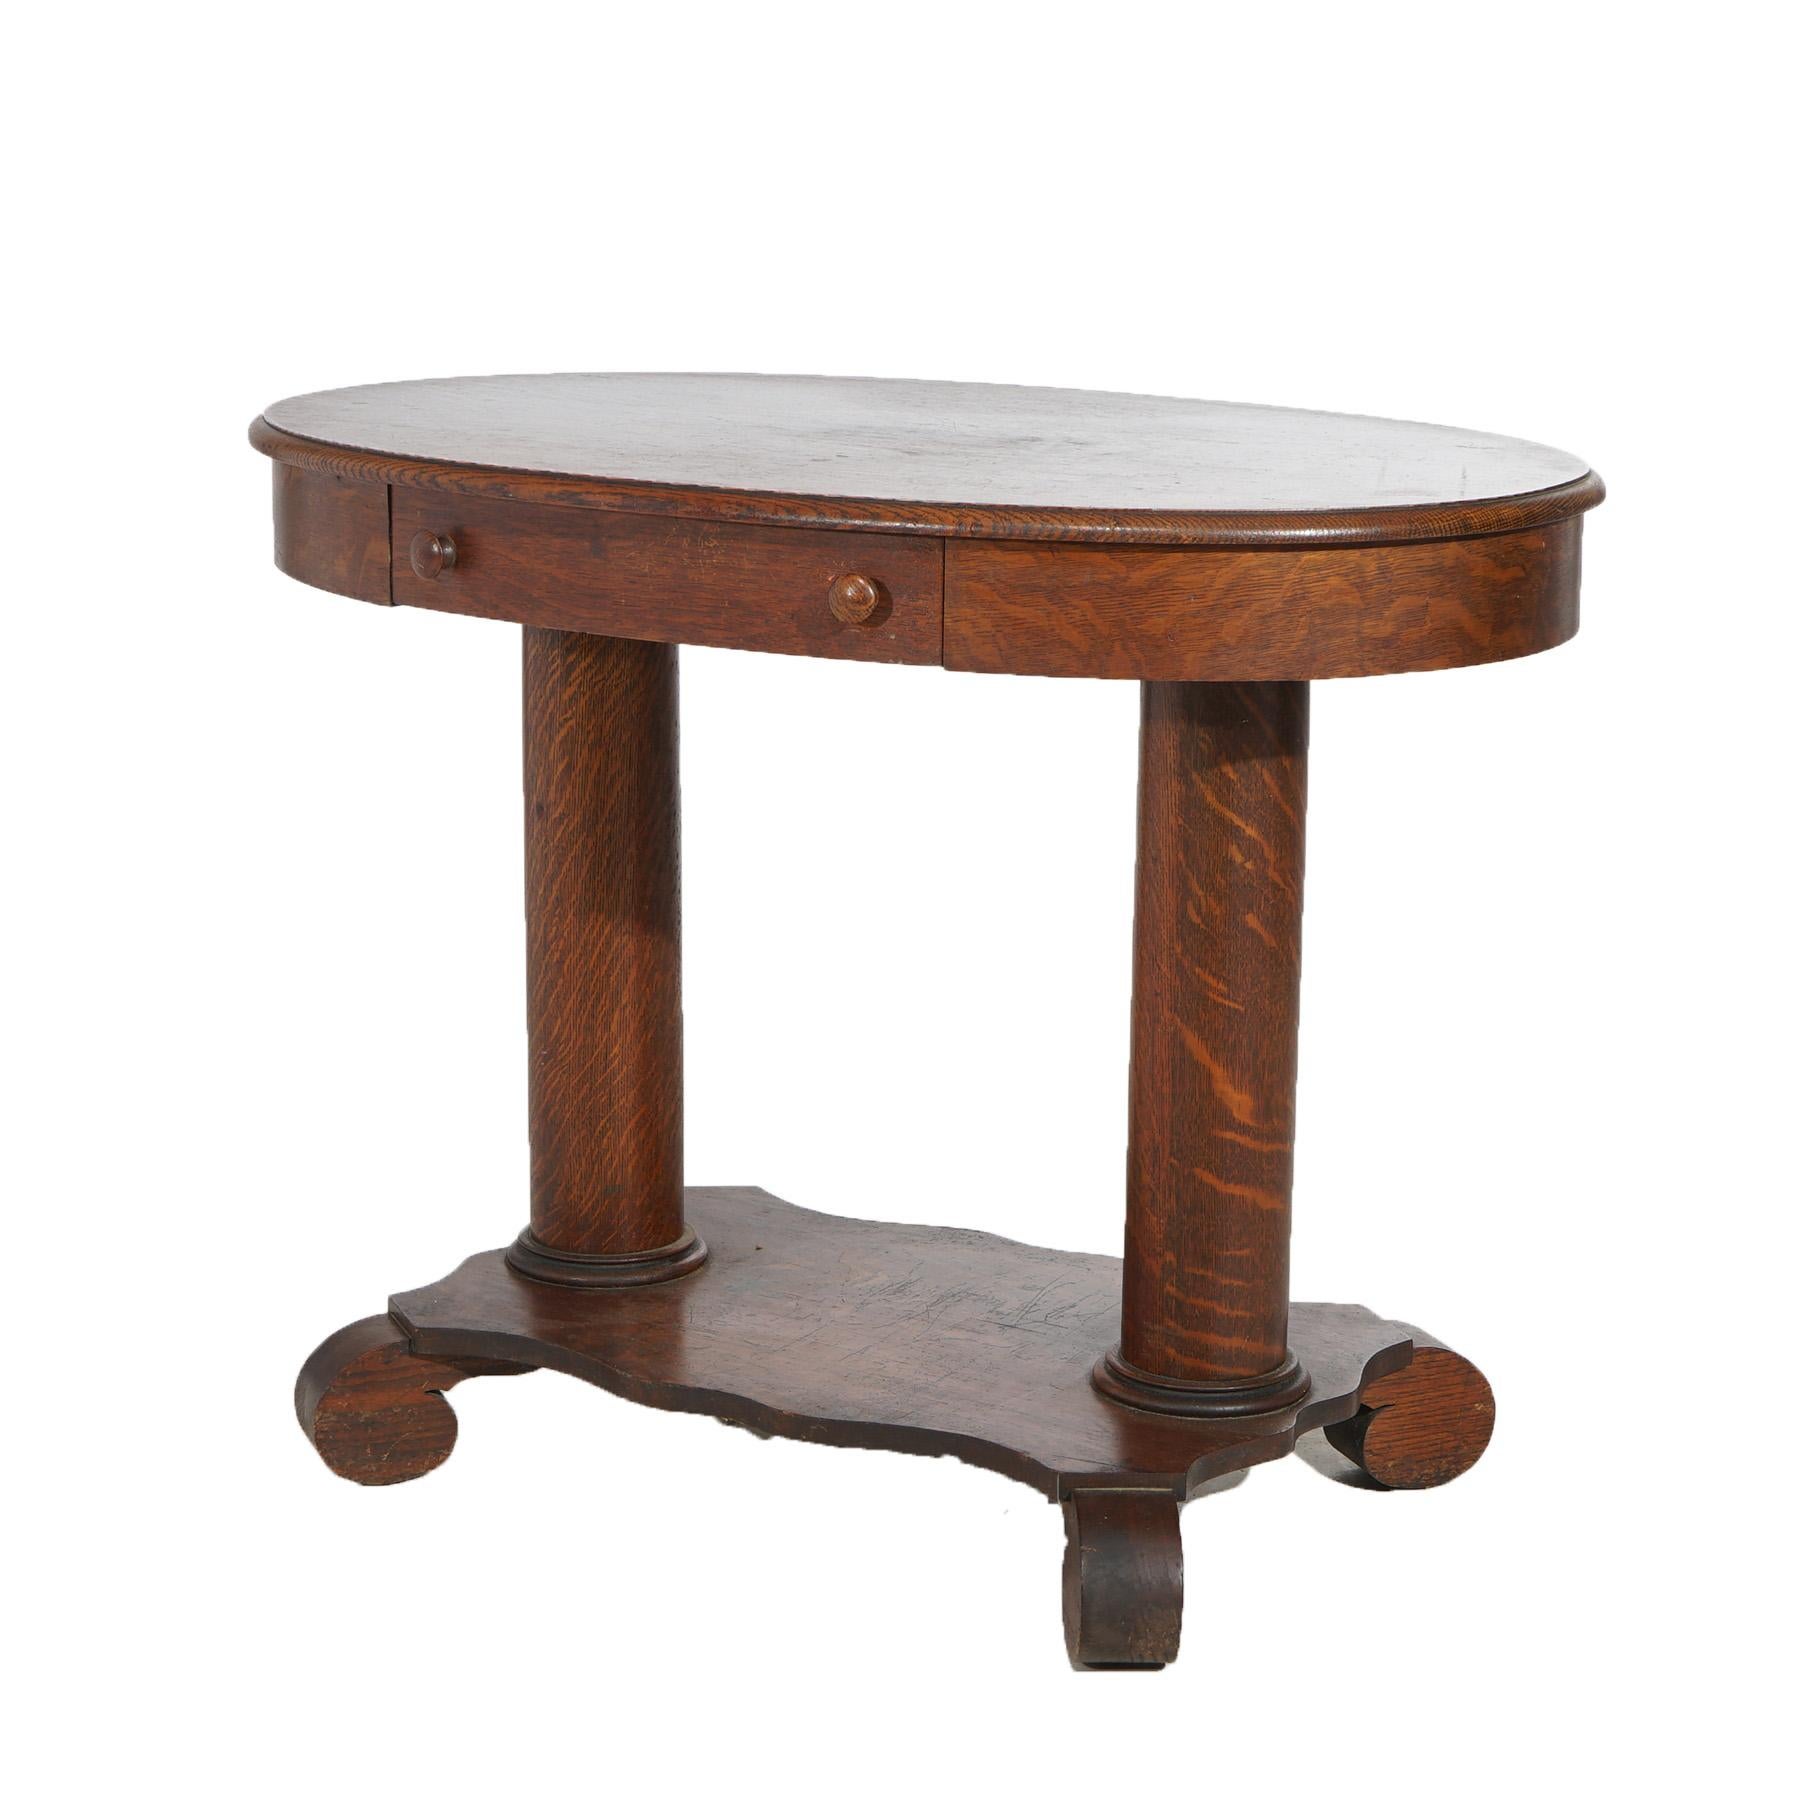 An antique Arts and Crafts library table offers quarter sawn oak construction with oval top having single drawer, raised on double pedestal base with scroll form feet, c1910

Measures - 29.25